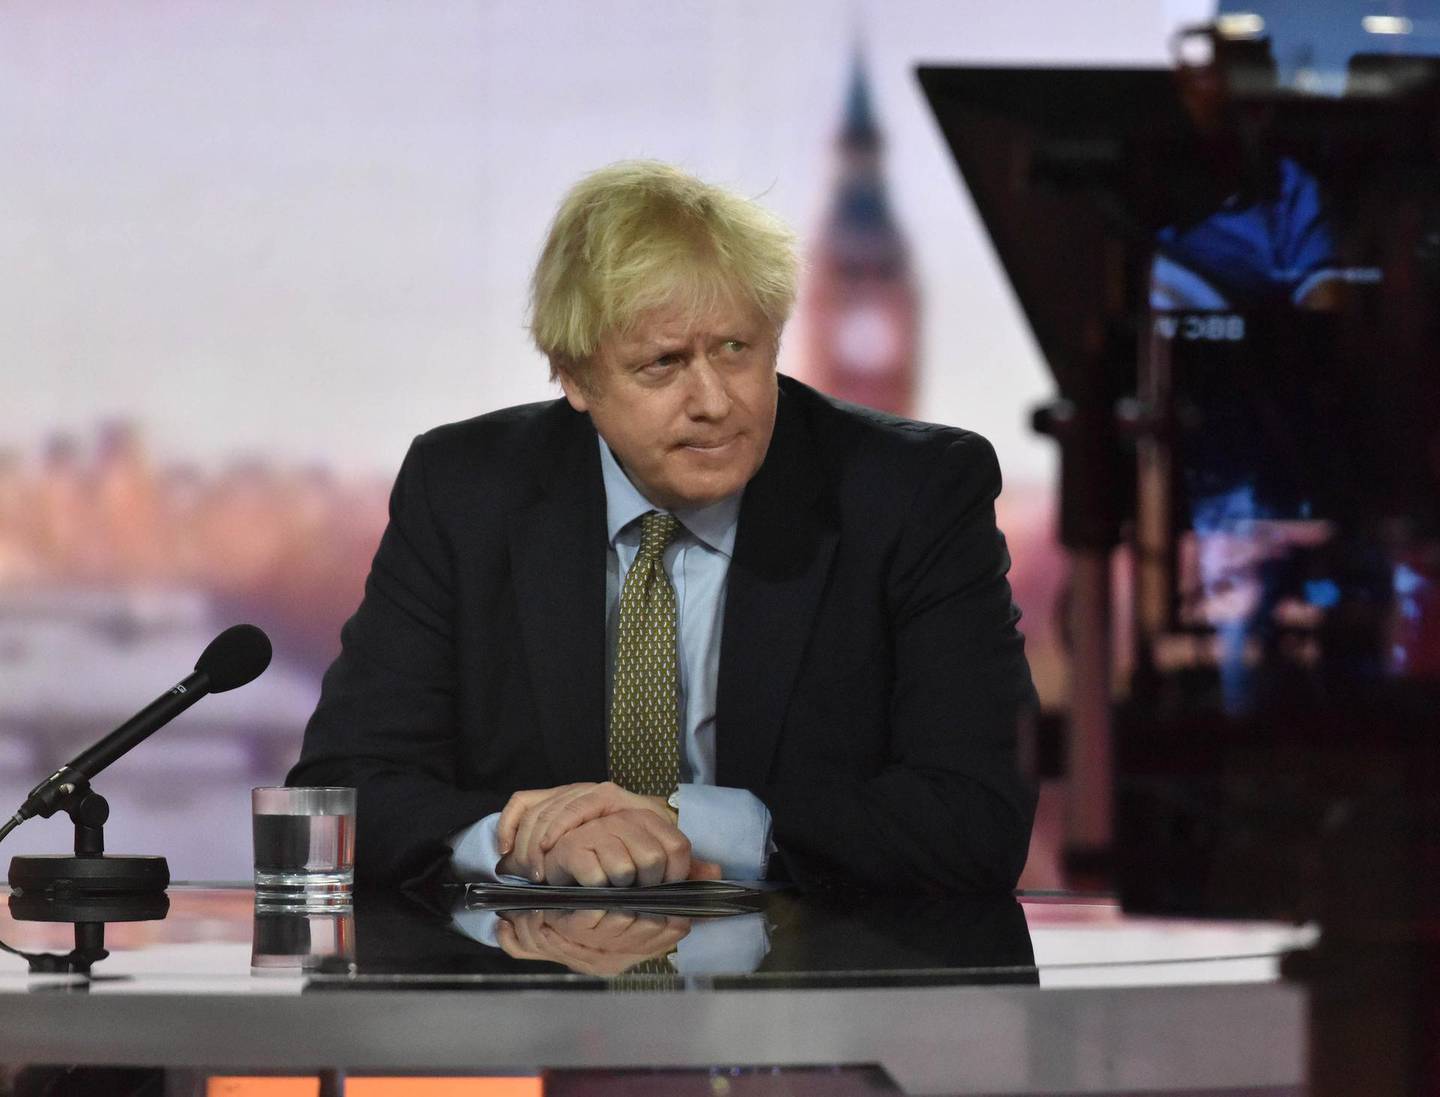 A handout picture released by the British Broadcasting Corporation (BBC) on January 3, 2021 shows Britain's Prime Minister Boris Johnson appearing on the BBC's Andrew Marr Show weekly political programme at their studio in London. British Prime Minister Boris Johnson said on January 3, 2021 he was "reconciled" to the prospect of tougher restrictions to combat spiralling coronavirus cases, as a row flared over whether schools should reopen.  - RESTRICTED TO EDITORIAL USE - MANDATORY CREDIT " AFP PHOTO / JEFF OVERS-BBC " - NO MARKETING NO ADVERTISING CAMPAIGNS - DISTRIBUTED AS A SERVICE TO CLIENTS TO REPORT ON THE BBC PROGRAMME OR EVENT SPECIFIED IN THE CAPTION - NO ARCHIVE - NO USE AFTER - JANUARY 24, 2021
 / AFP / BBC / JEFF OVERS / RESTRICTED TO EDITORIAL USE - MANDATORY CREDIT " AFP PHOTO / JEFF OVERS-BBC " - NO MARKETING NO ADVERTISING CAMPAIGNS - DISTRIBUTED AS A SERVICE TO CLIENTS TO REPORT ON THE BBC PROGRAMME OR EVENT SPECIFIED IN THE CAPTION - NO ARCHIVE - NO USE AFTER - JANUARY 24, 2021
